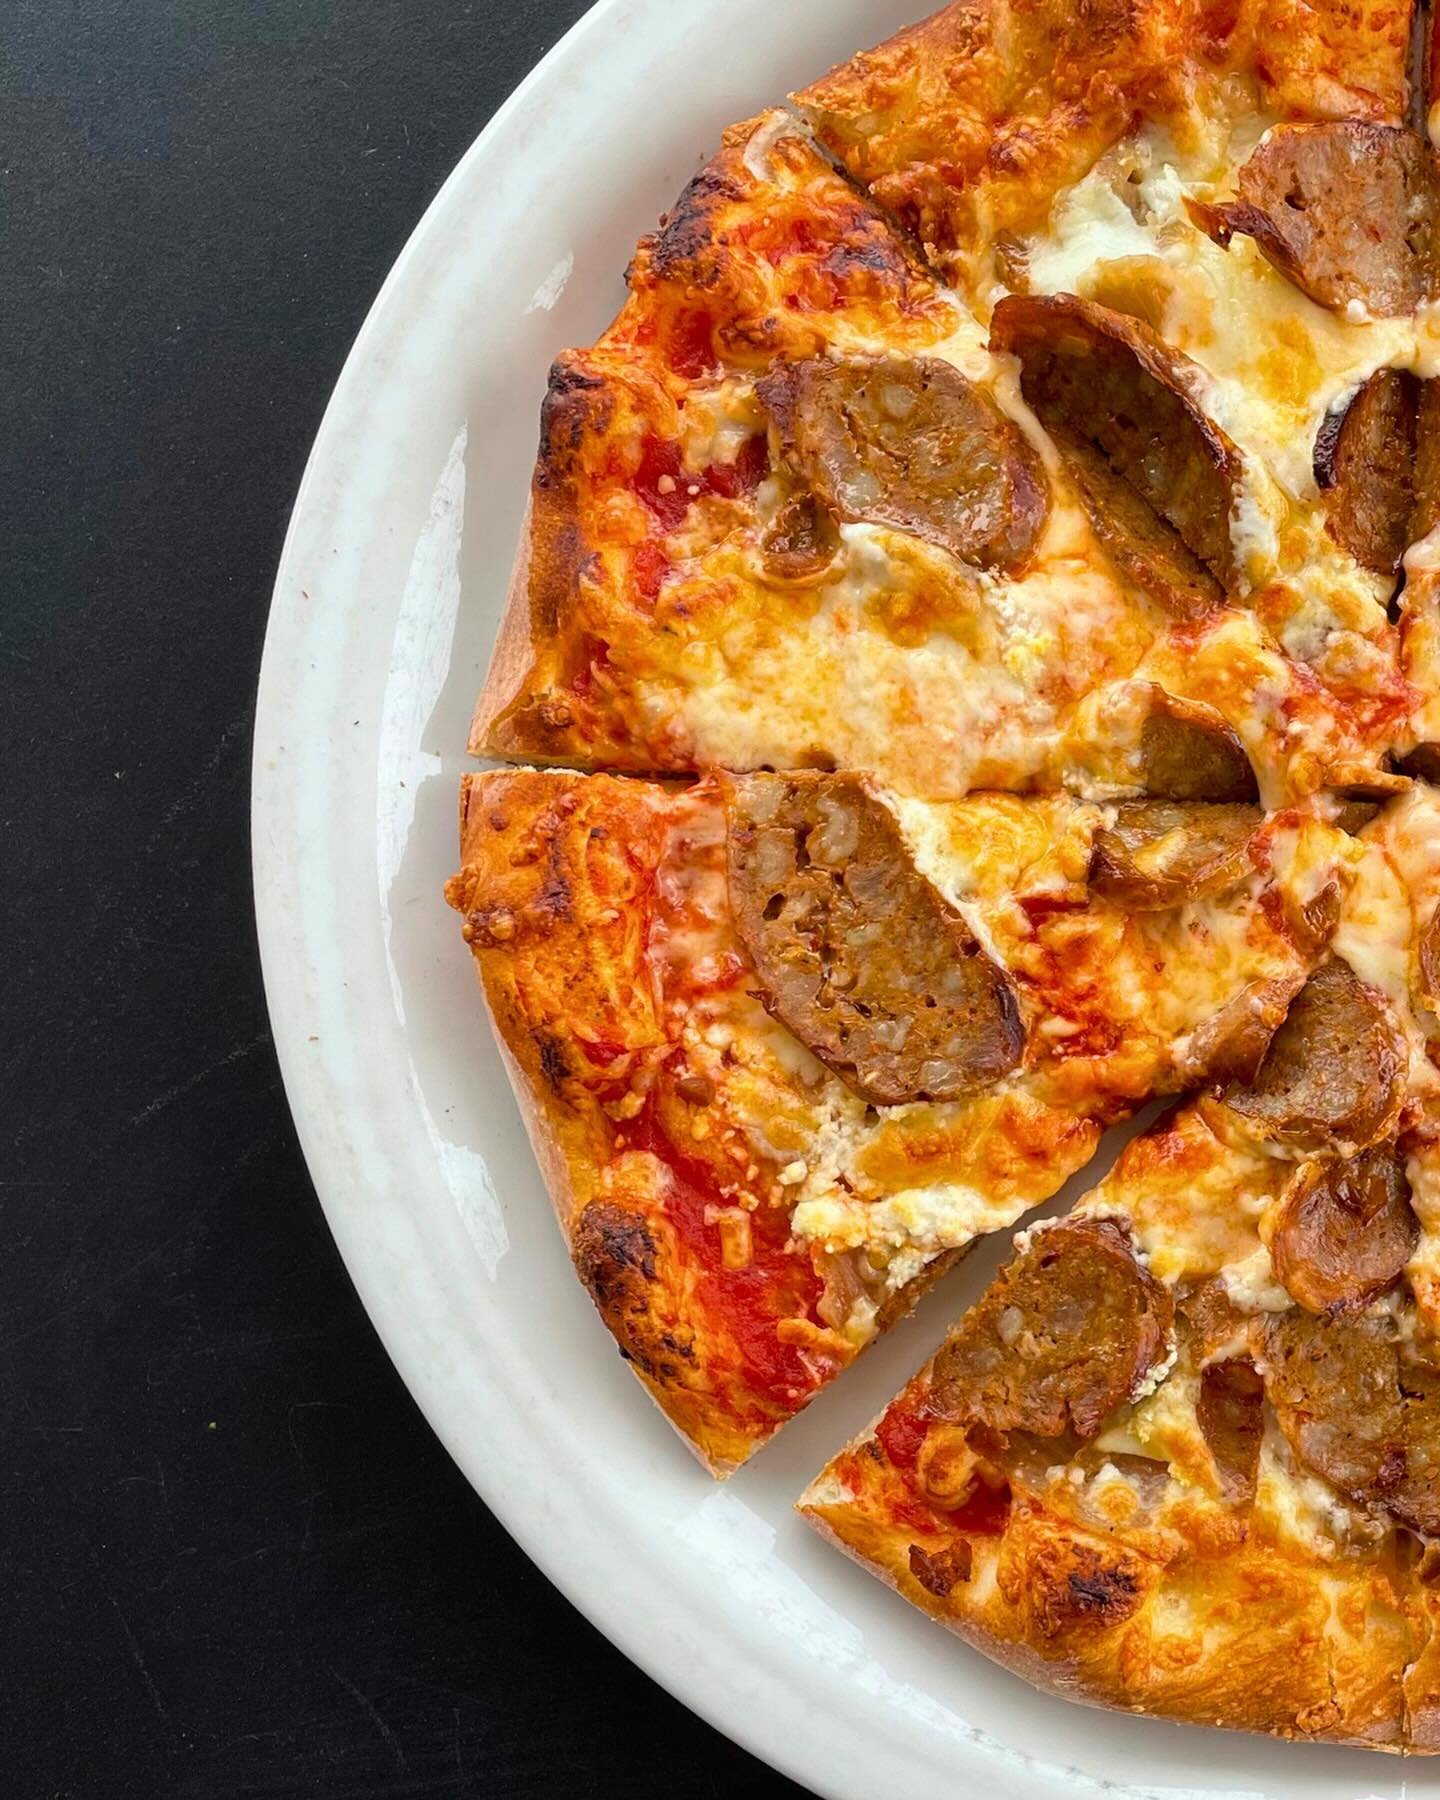 Safe to say our pizzas are definitely ready for their close ups! 👏🏻

The Carnivore. A delicious combination of ham, calabrese salami and italian sausage!  It&rsquo;s a classic with a little bit of spice!

The Perogy Pizza.  A fan fave with mashed p